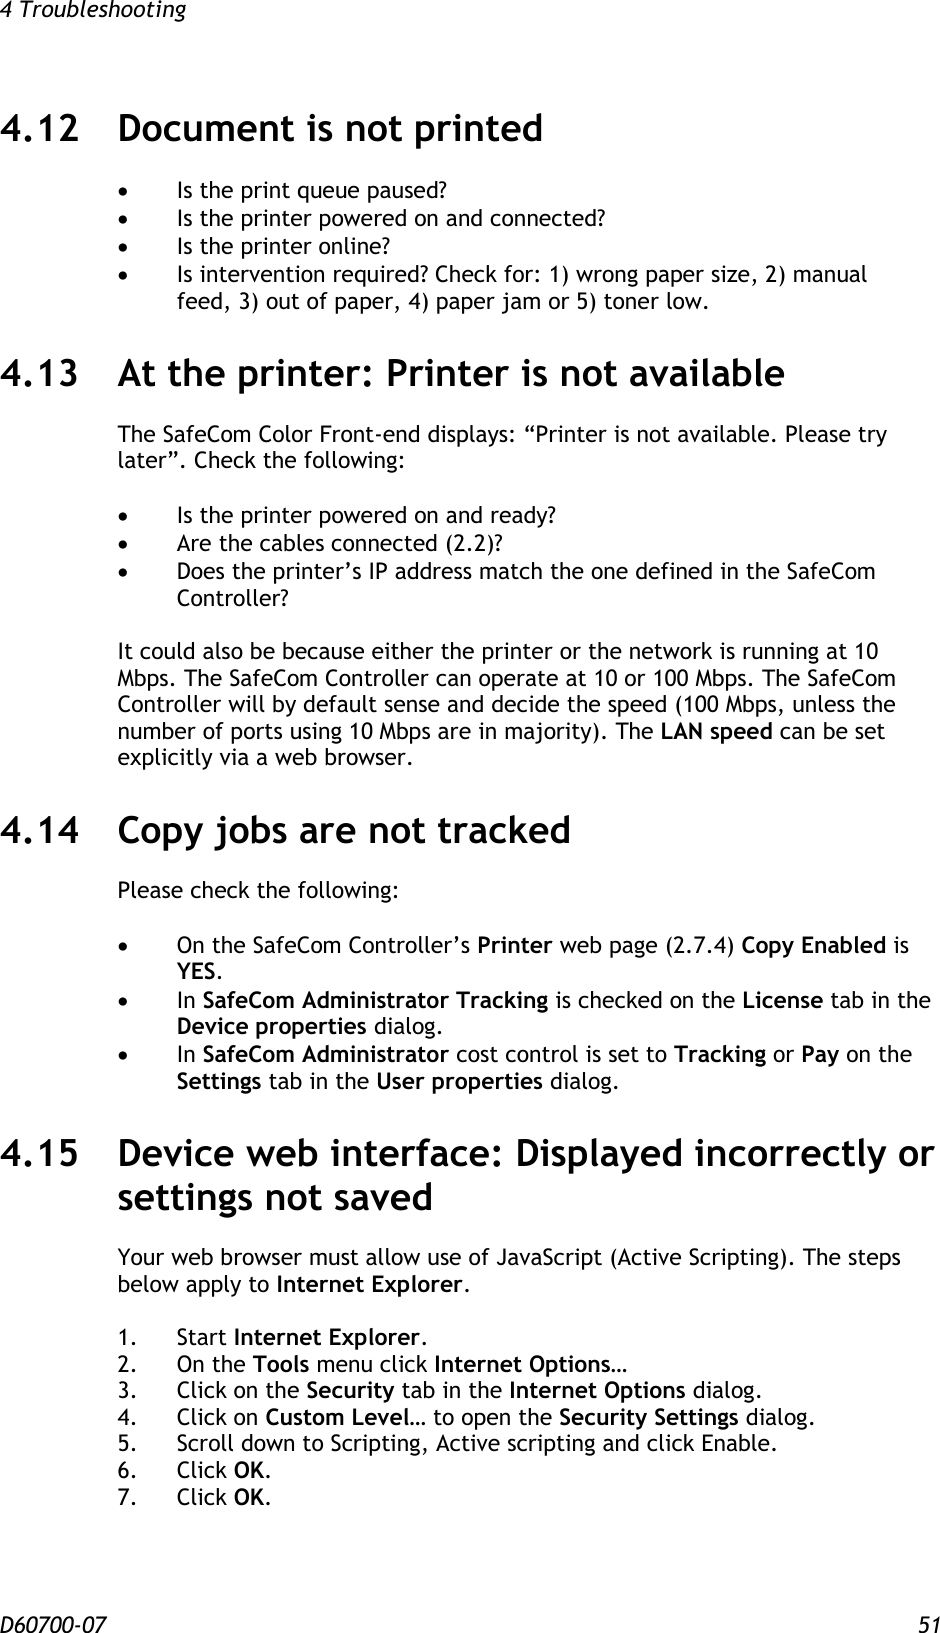 4 Troubleshooting  D60700-07 51 4.12 Document is not printed  Is the print queue paused?  Is the printer powered on and connected?  Is the printer online?  Is intervention required? Check for: 1) wrong paper size, 2) manual         feed, 3) out of paper, 4) paper jam or 5) toner low. 4.13 At the printer: Printer is not available The SafeCom Color Front-end displays: “Printer is not available. Please try later”. Check the following:   Is the printer powered on and ready?  Are the cables connected (2.2)?  Does the printer’s IP address match the one defined in the SafeCom Controller?  It could also be because either the printer or the network is running at 10 Mbps. The SafeCom Controller can operate at 10 or 100 Mbps. The SafeCom Controller will by default sense and decide the speed (100 Mbps, unless the number of ports using 10 Mbps are in majority). The LAN speed can be set explicitly via a web browser. 4.14 Copy jobs are not tracked Please check the following:   On the SafeCom Controller’s Printer web page (2.7.4) Copy Enabled is YES.  In SafeCom Administrator Tracking is checked on the License tab in the Device properties dialog.  In SafeCom Administrator cost control is set to Tracking or Pay on the Settings tab in the User properties dialog. 4.15 Device web interface: Displayed incorrectly or settings not saved Your web browser must allow use of JavaScript (Active Scripting). The steps below apply to Internet Explorer.  1.  Start Internet Explorer. 2.  On the Tools menu click Internet Options… 3.  Click on the Security tab in the Internet Options dialog. 4.  Click on Custom Level… to open the Security Settings dialog. 5.  Scroll down to Scripting, Active scripting and click Enable. 6.  Click OK. 7.  Click OK.   